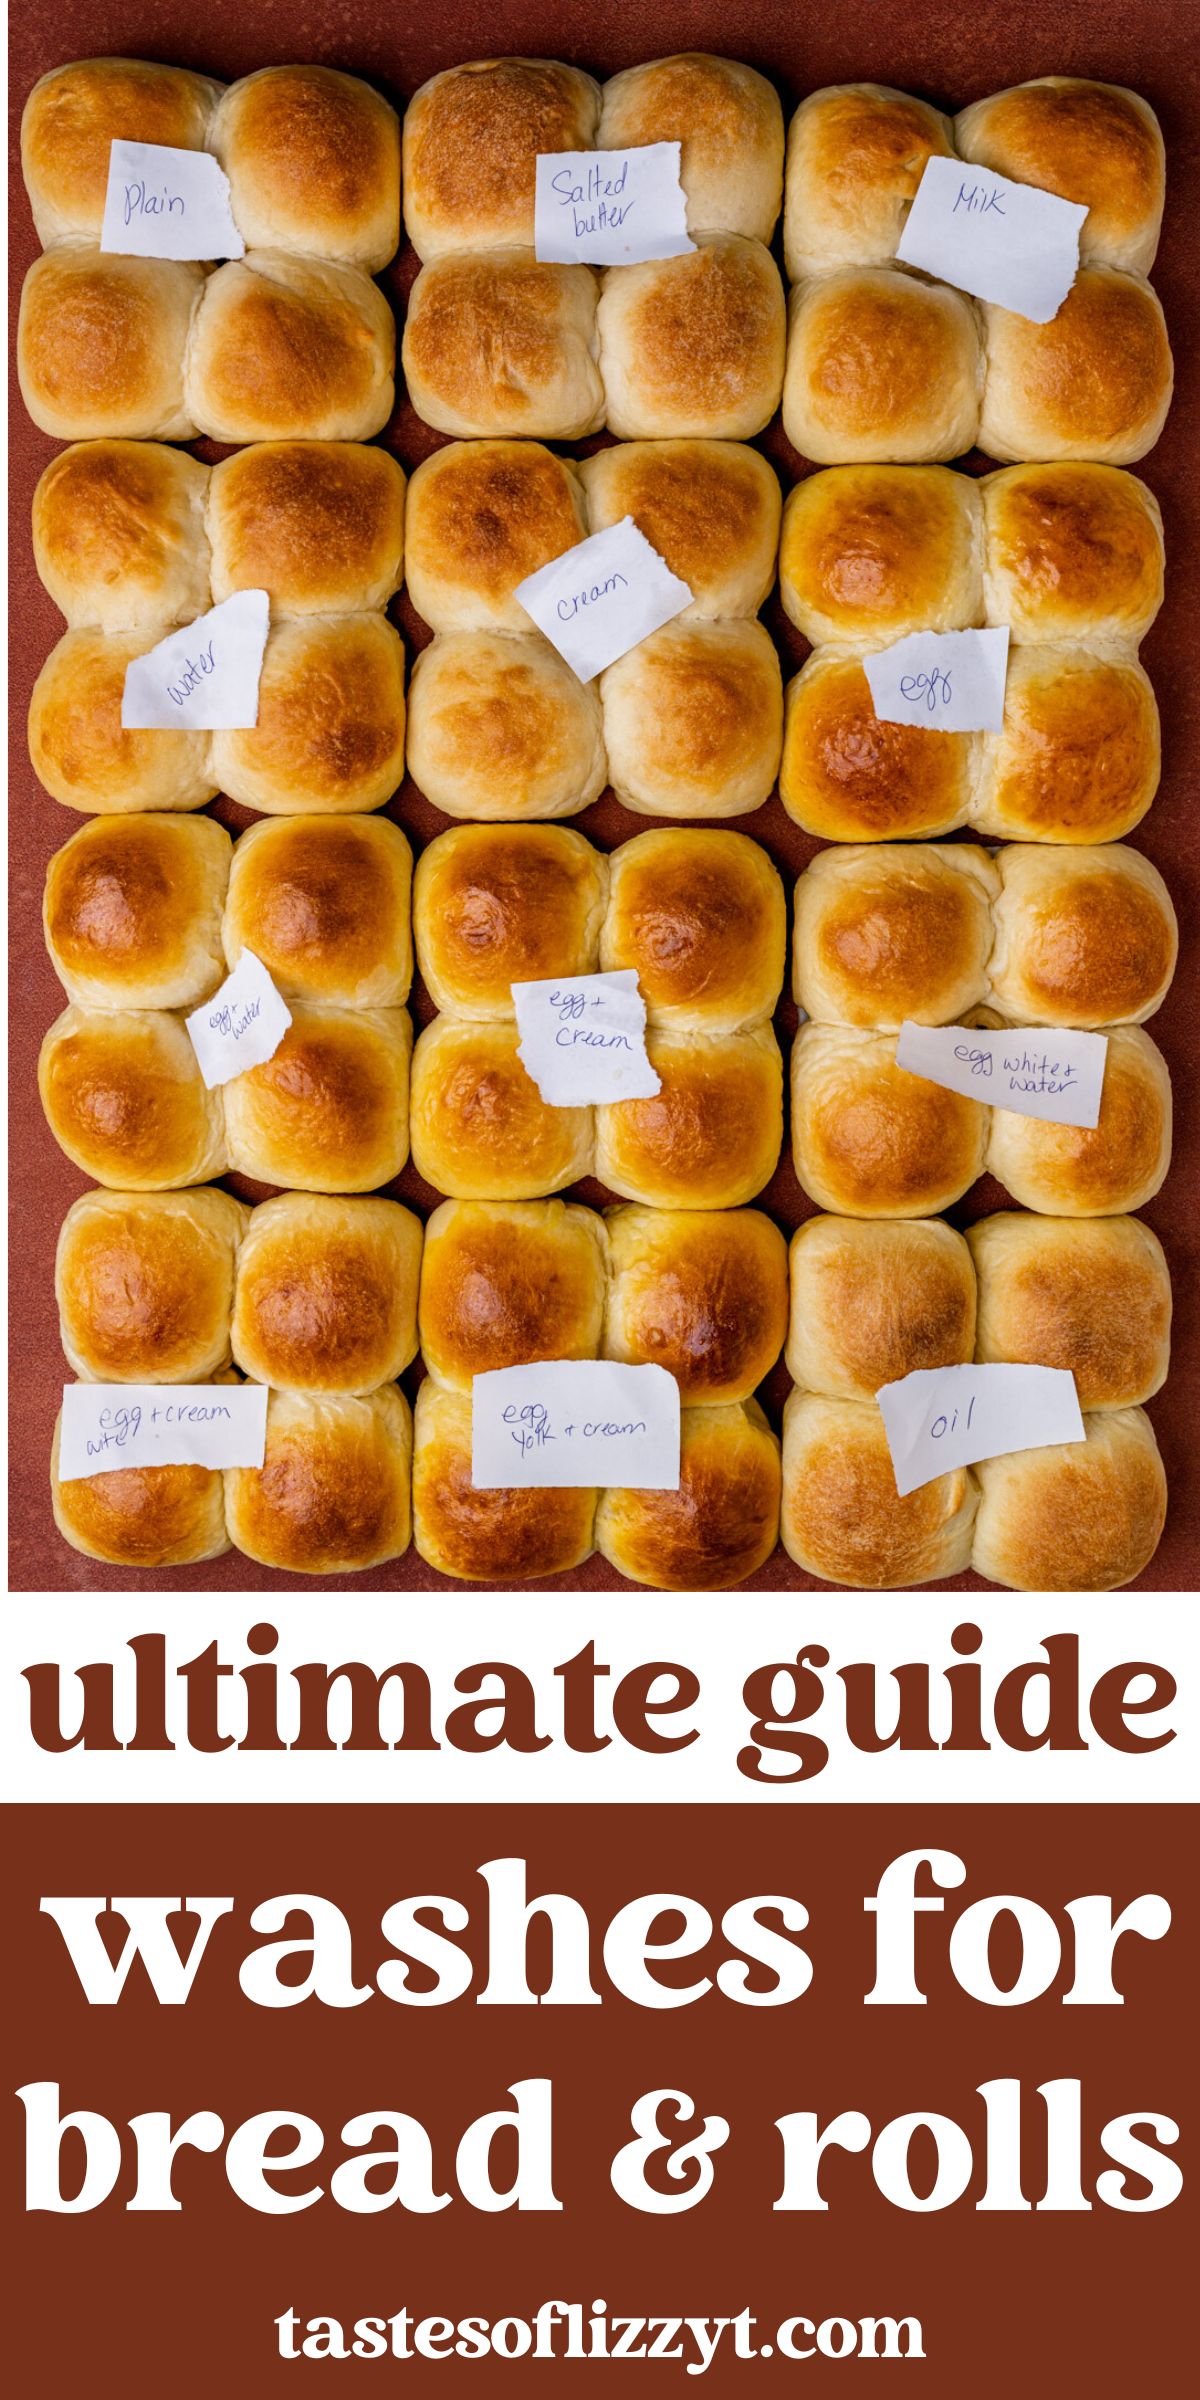 https://www.tastesoflizzyt.com/wp-content/uploads/2022/11/washes-for-breads-and-rolls-pin.jpg